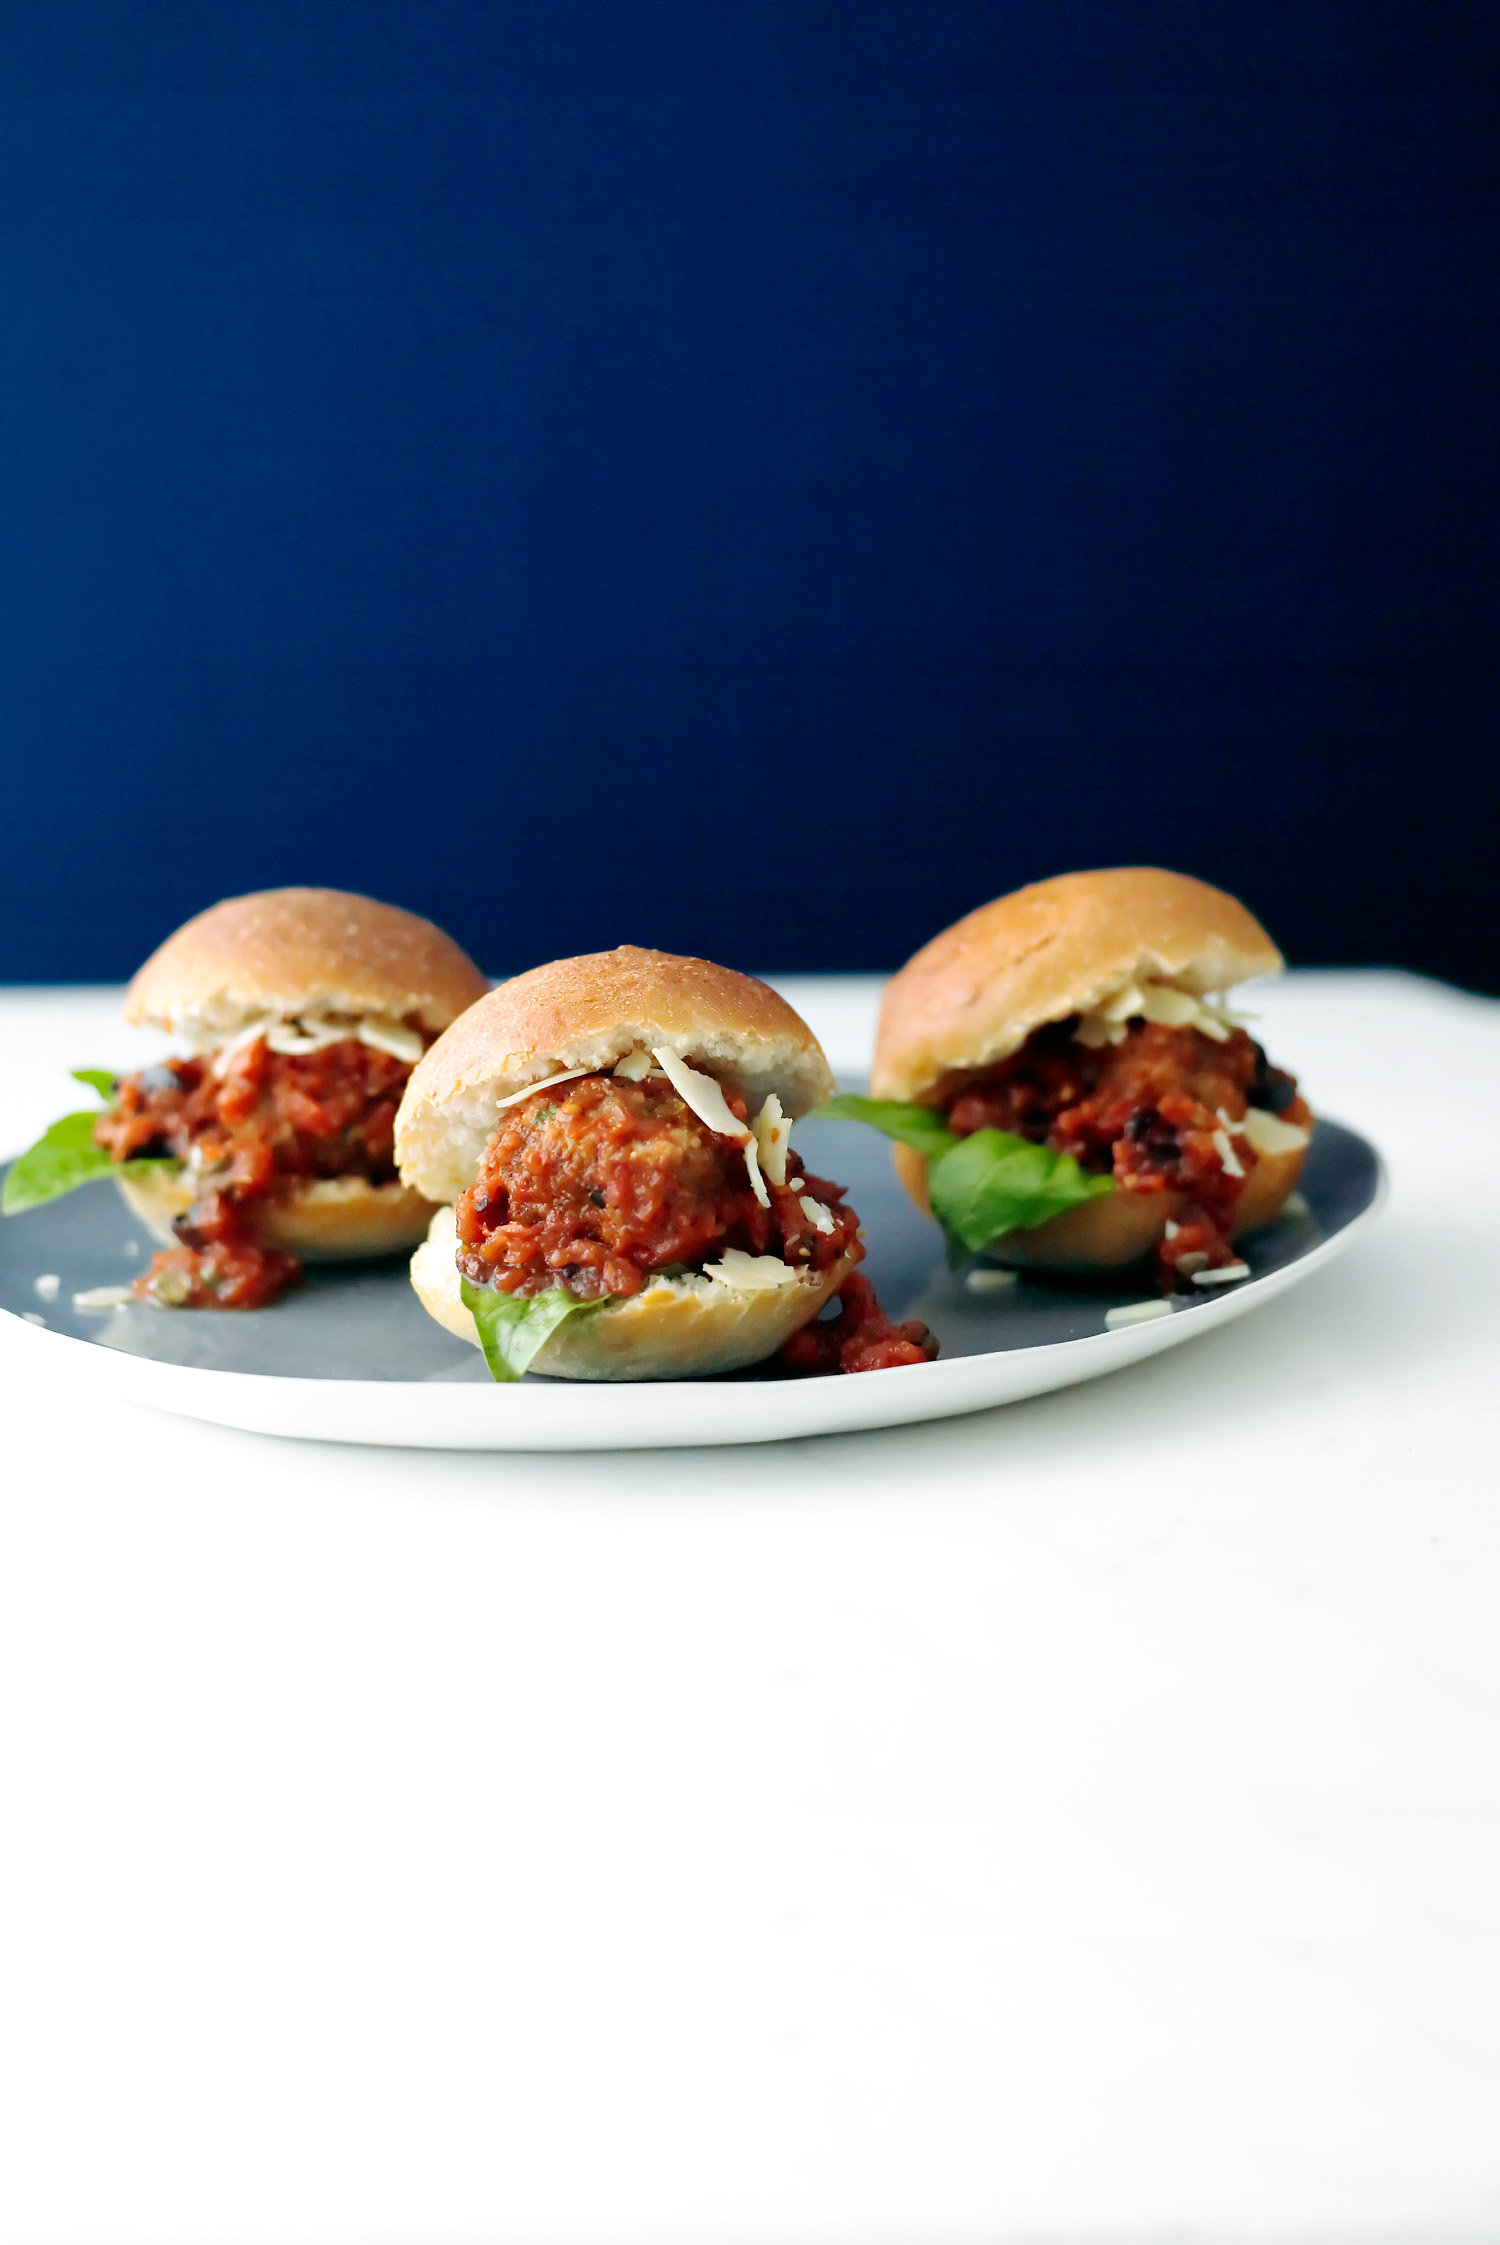 10 New Ways with Meatballs